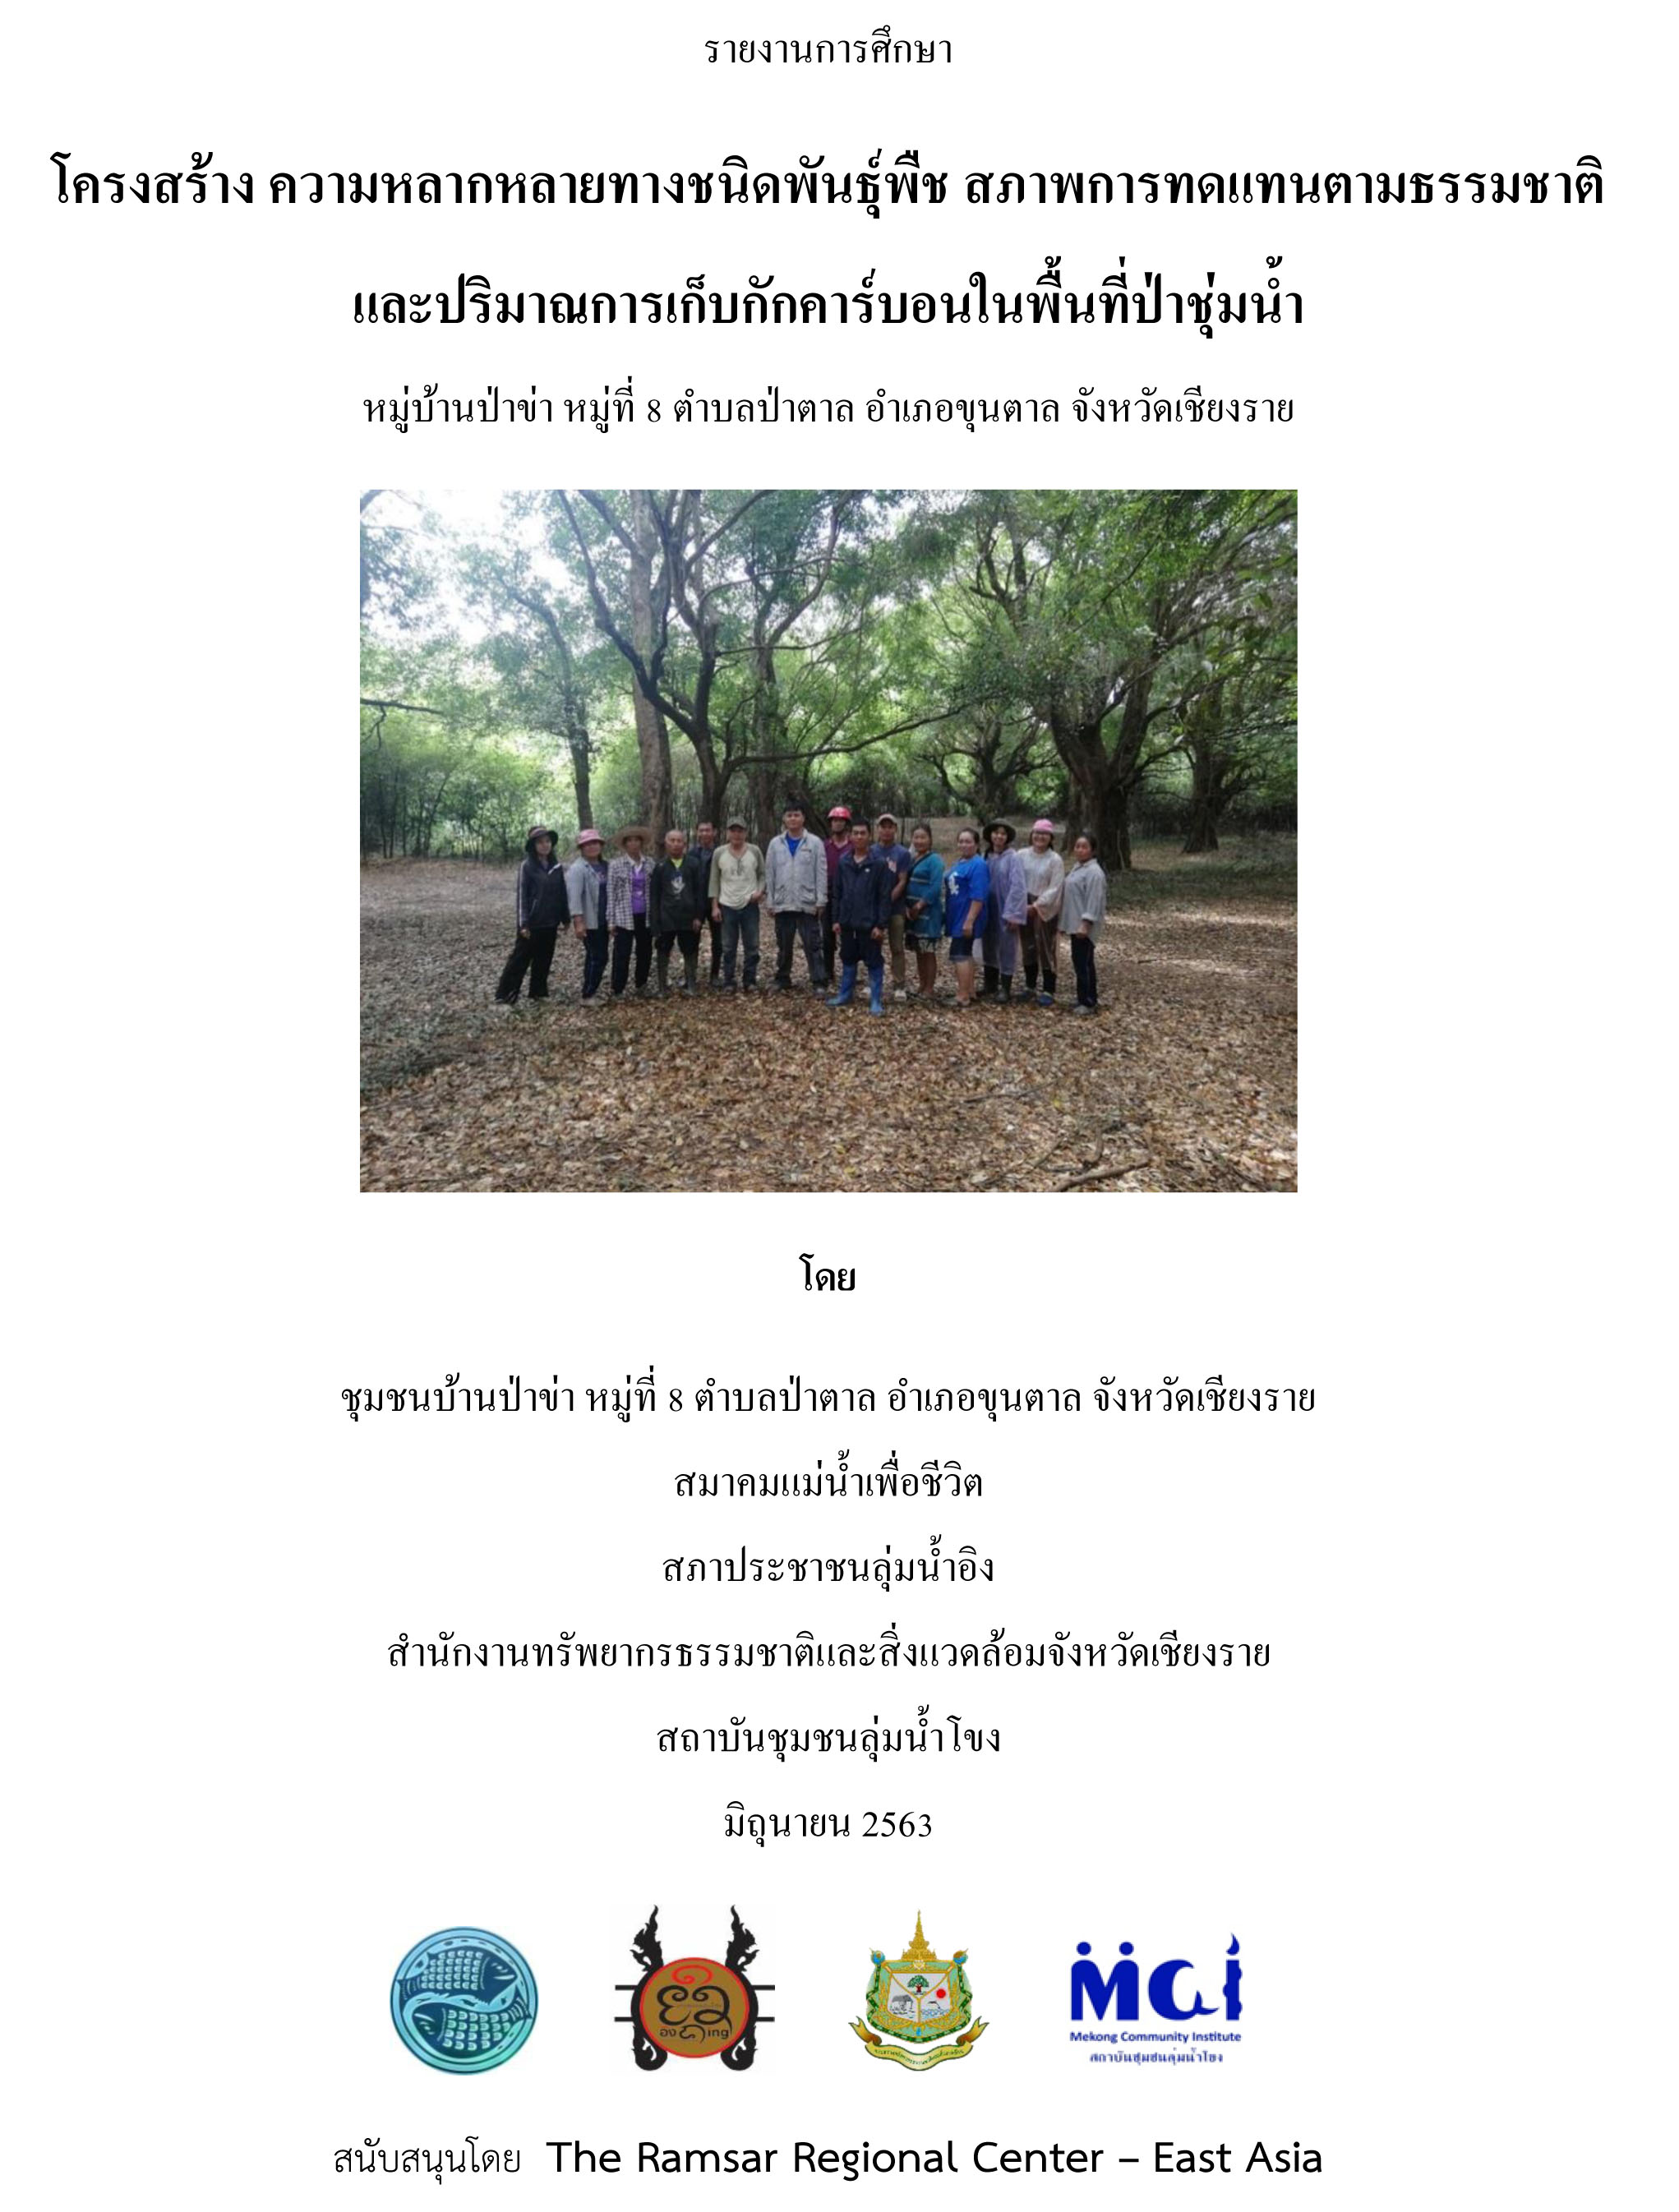 2563 06 26 Report on the forest structure of Ban Pa Kha